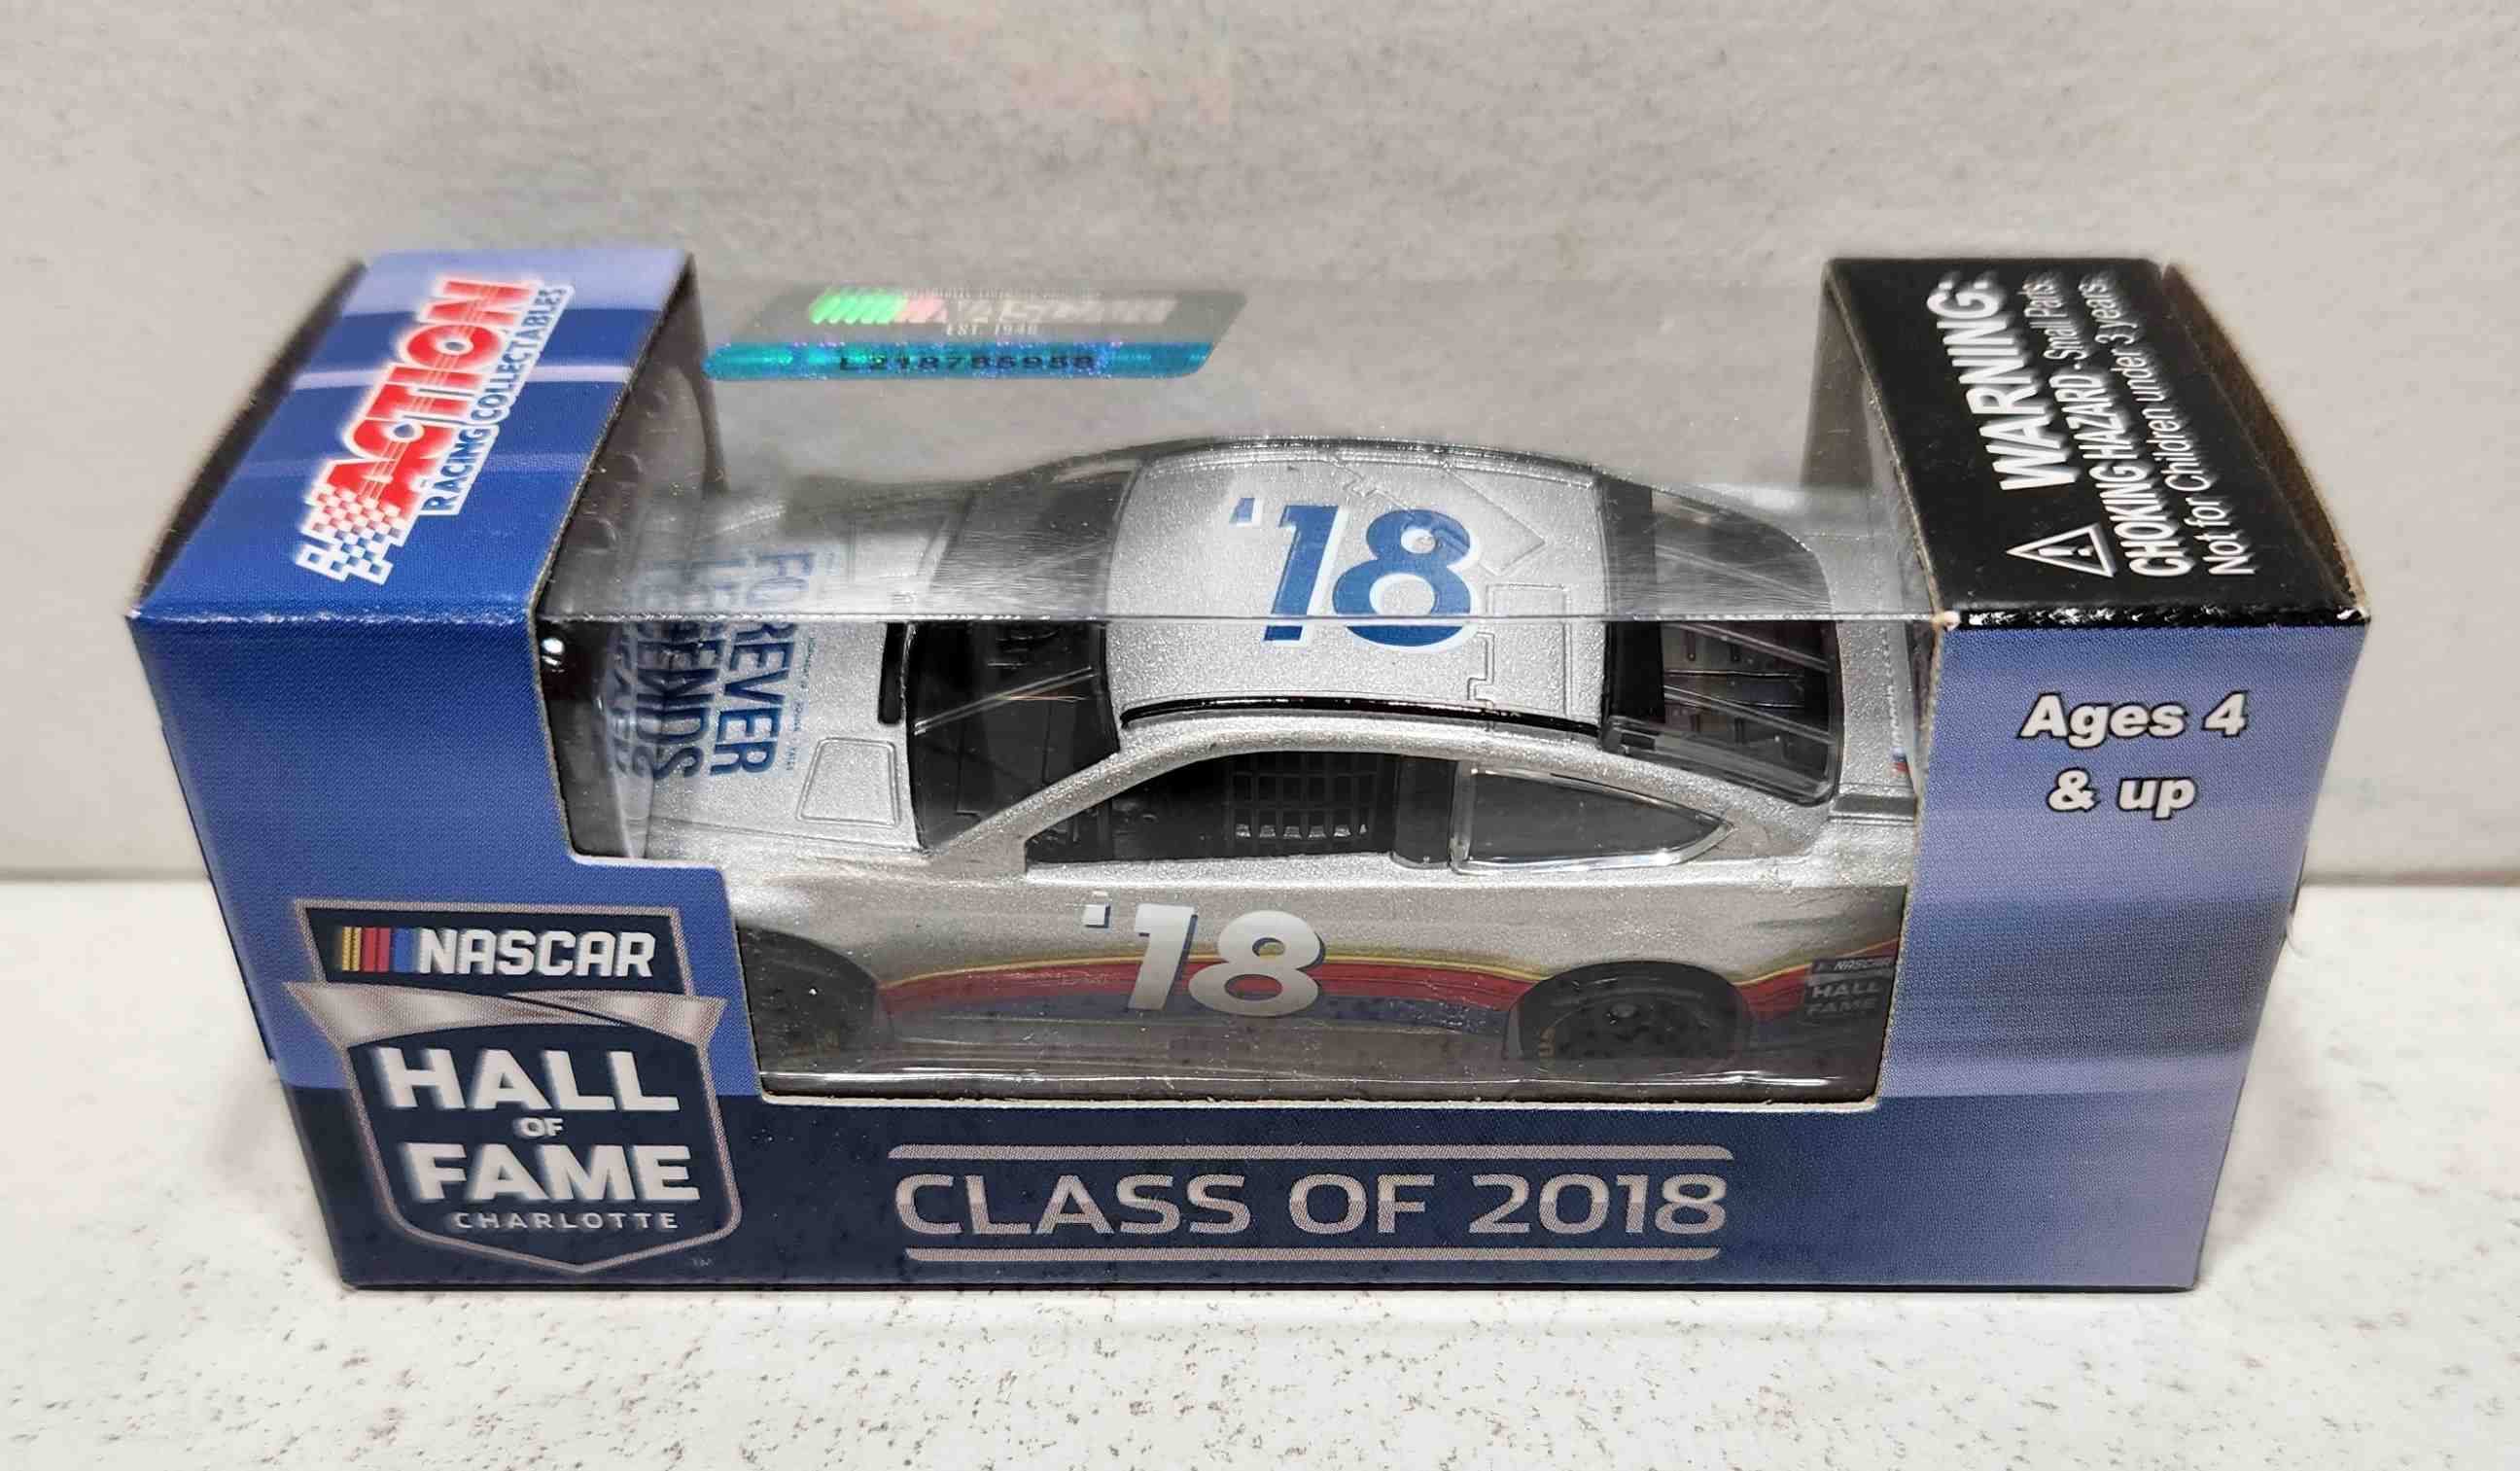 2018 Nascar 1/64th Class of 2018 Hall of Fame Fusion